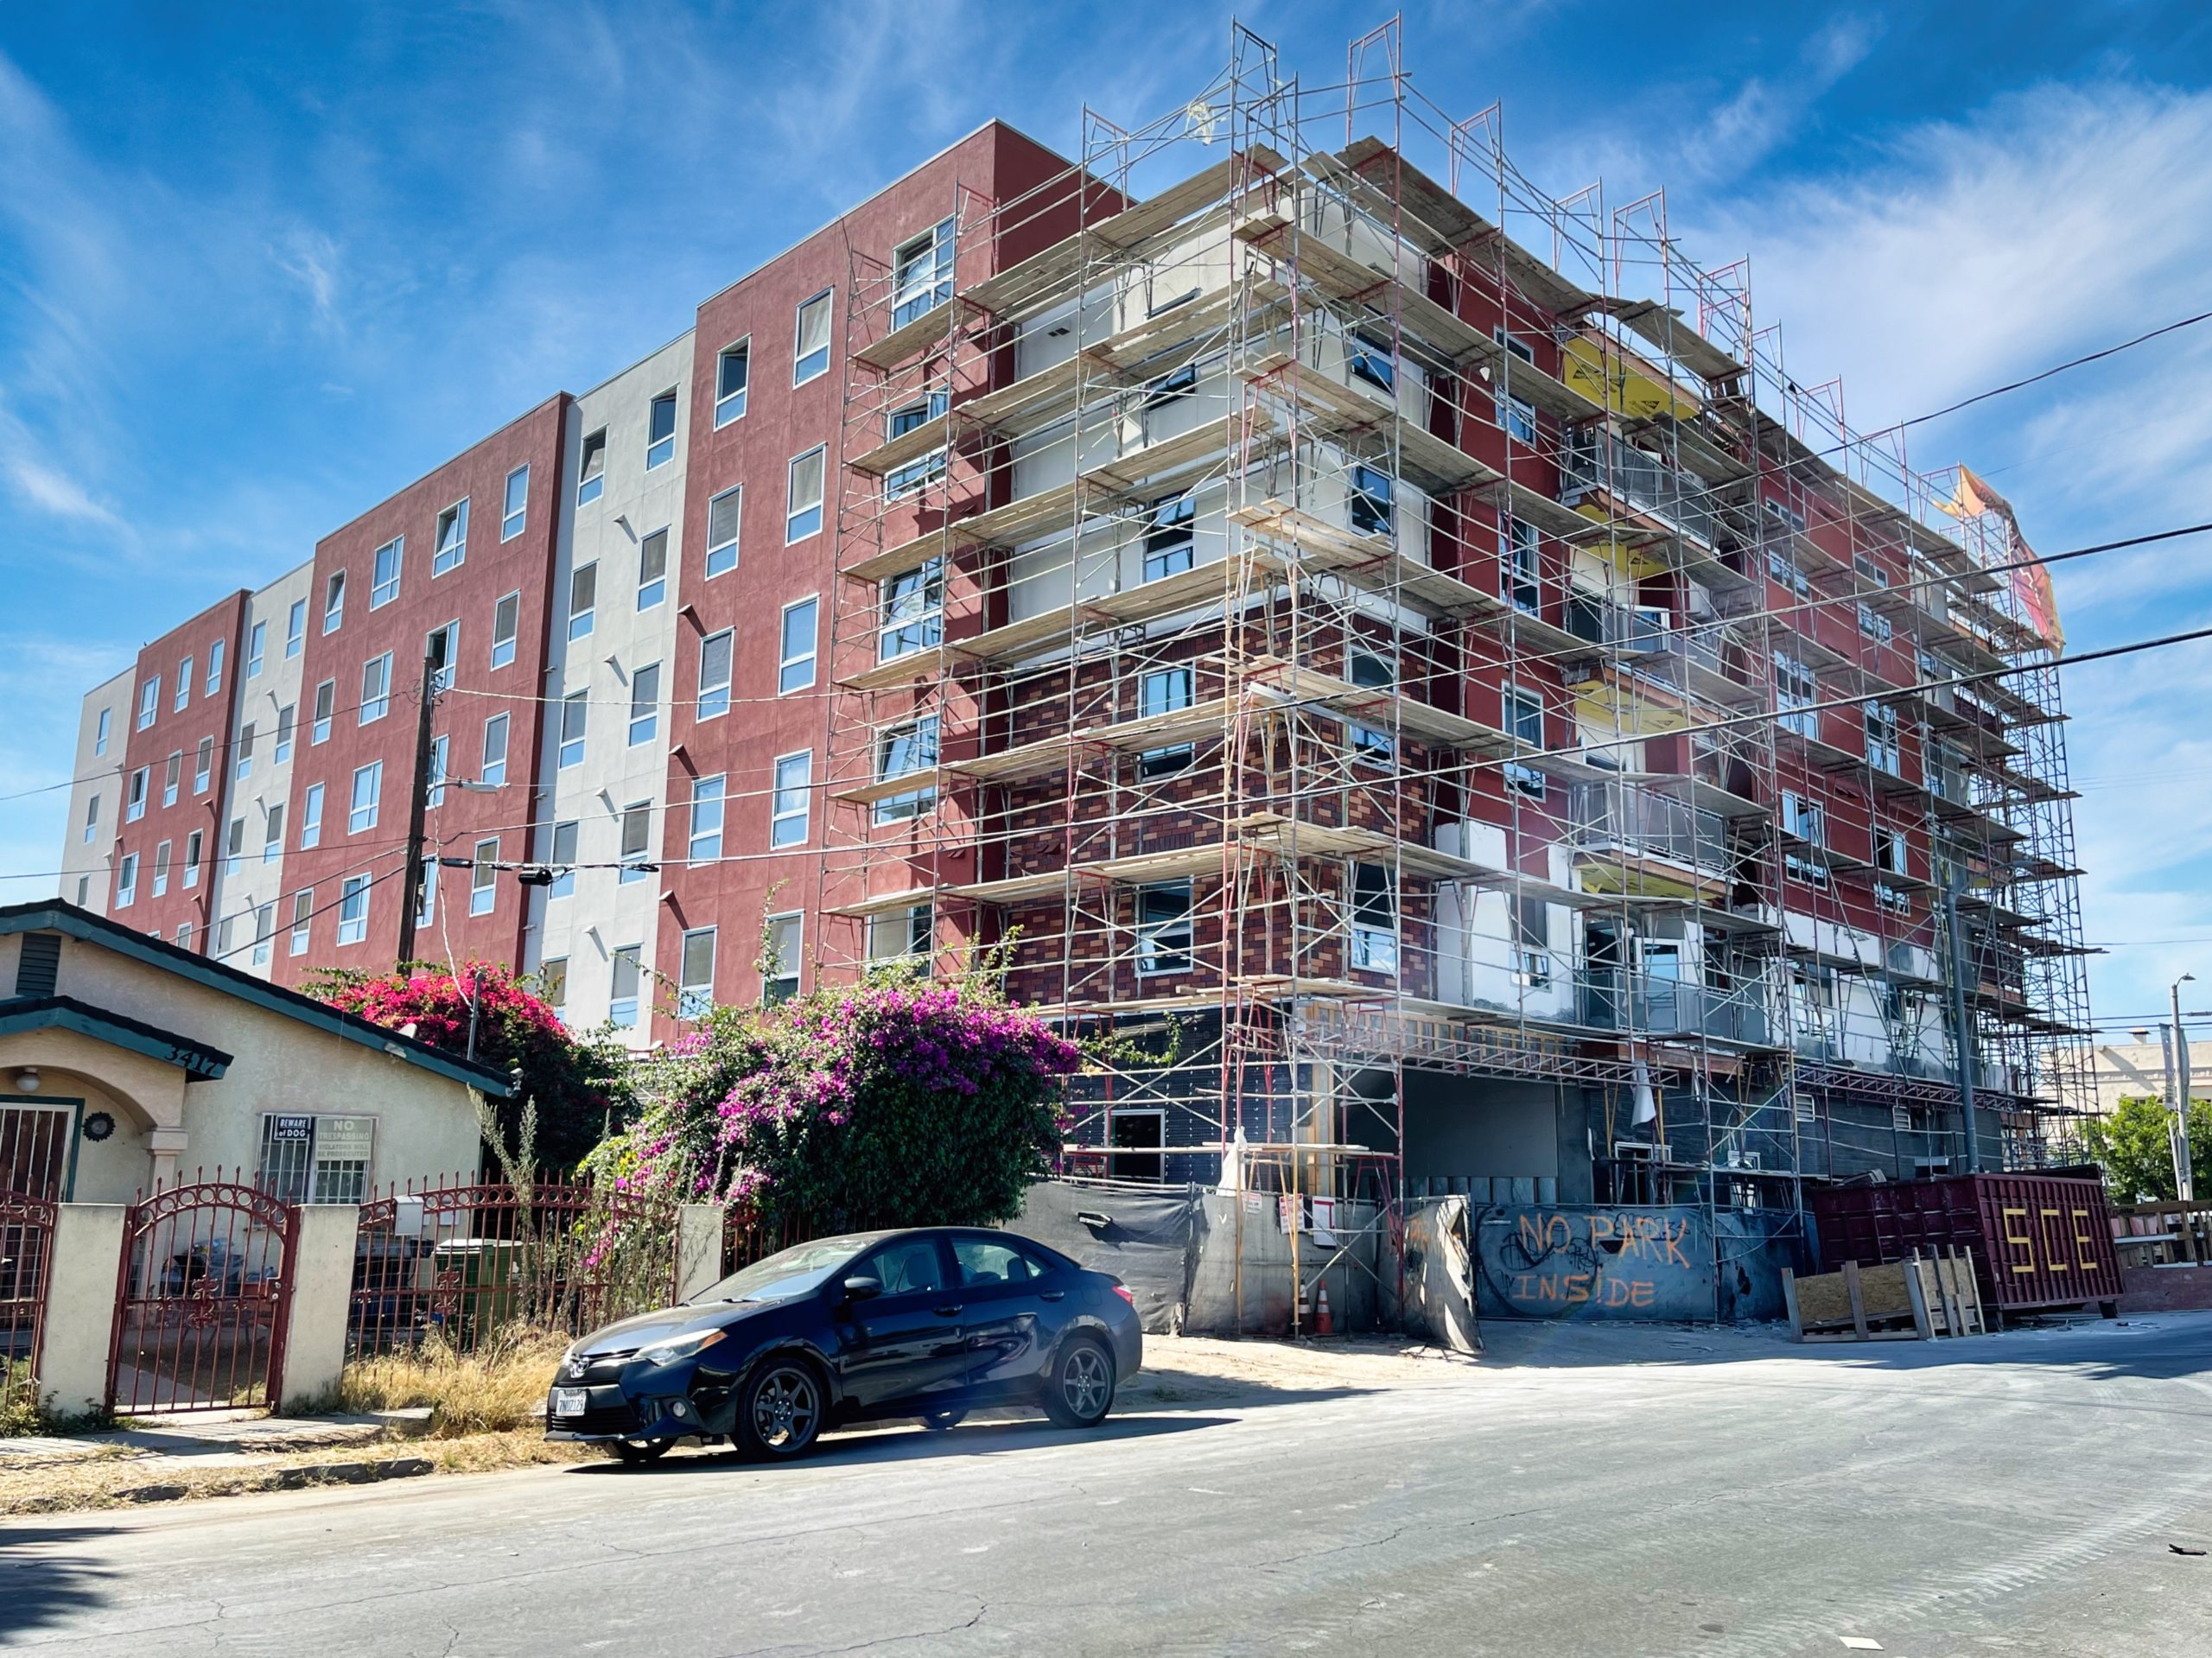 Decarbonizing California Equitably: New SAJE Report Looks at the Effects of Decarbonization on Tenants Across the State